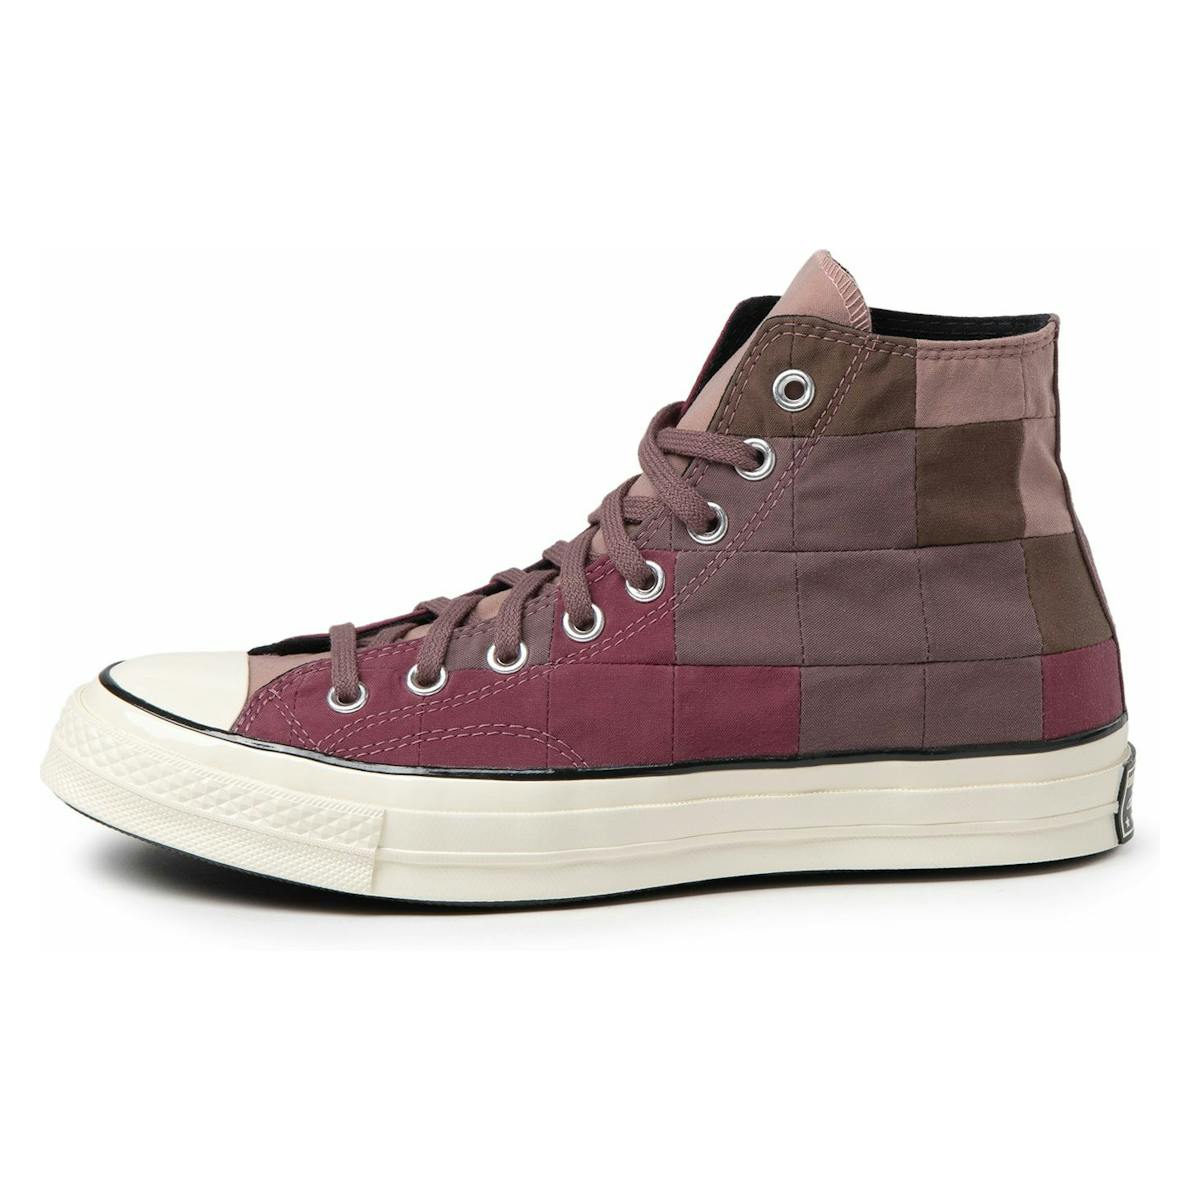 Converse Chuck Taylor All-Star 70 Hi Plant Color Patchwork Rose Taupe